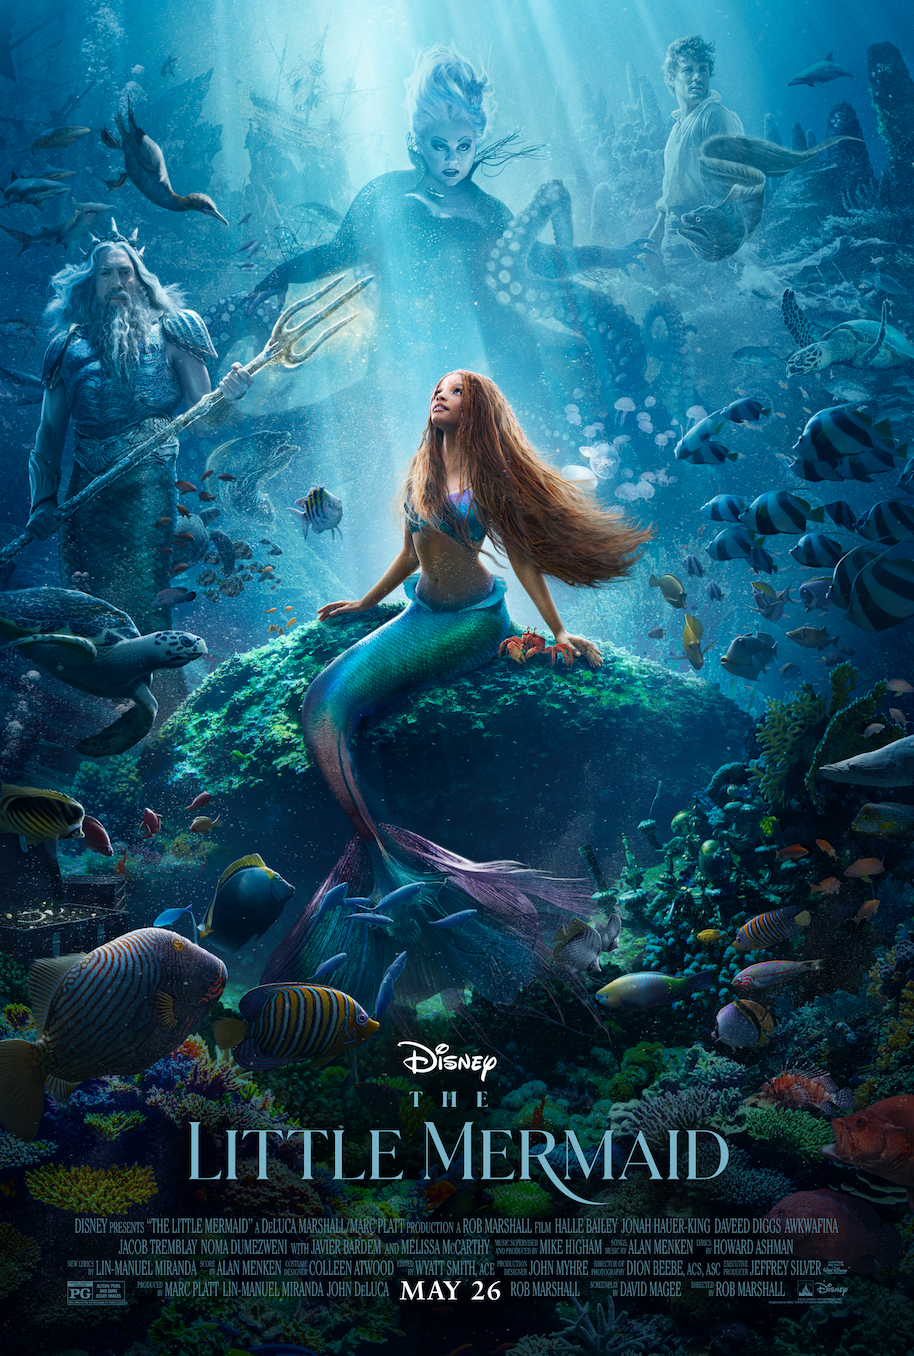 Halle Bailey exudes singing quality in new The Little Mermaid trailer